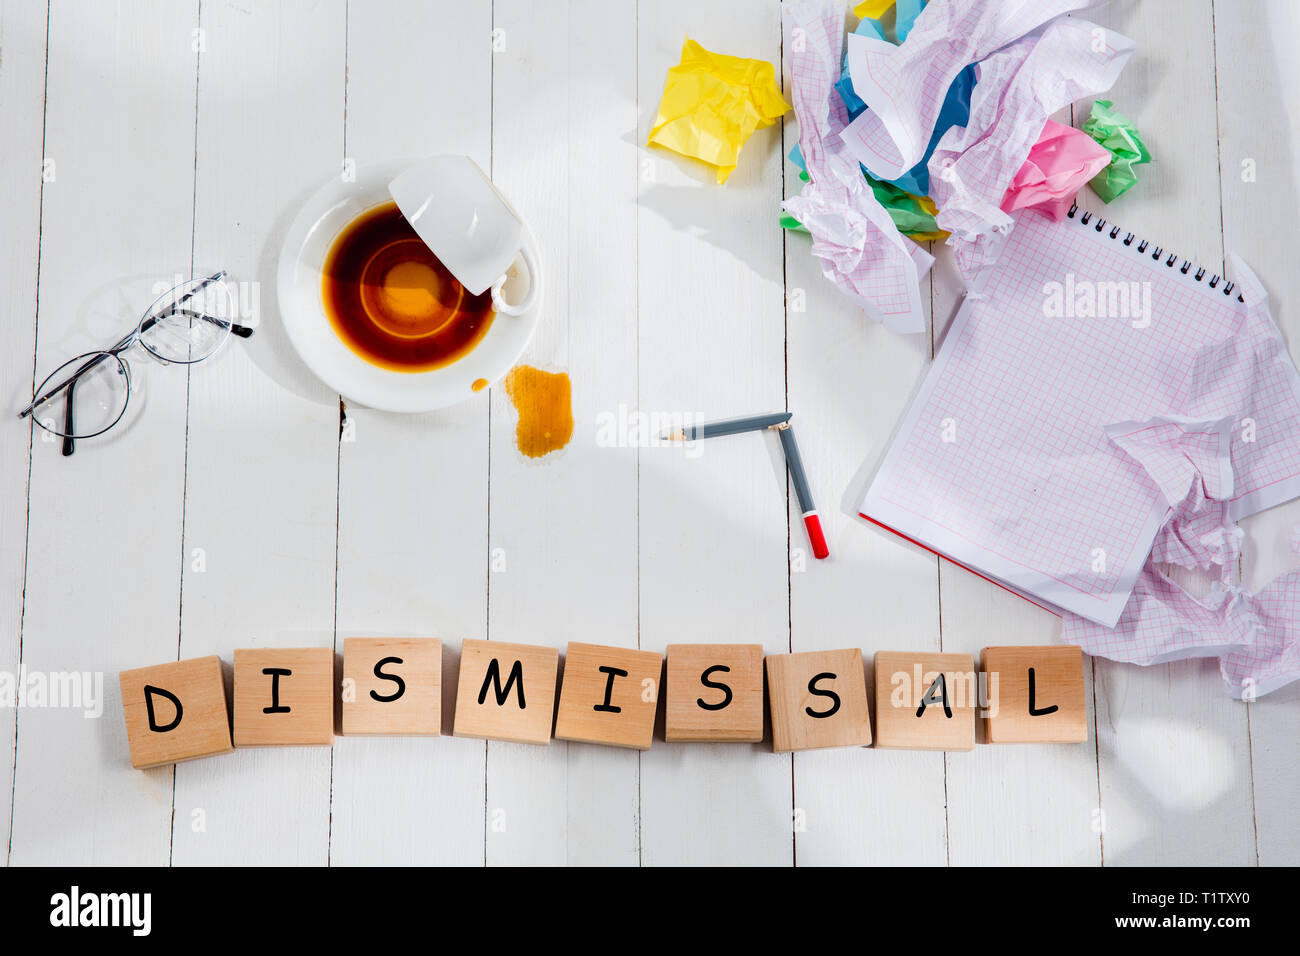 Dismissal. Message in wooden cubes on a table background. Lifestyle, business, office, management and career concept. Top or flat lay view. Stock Photo